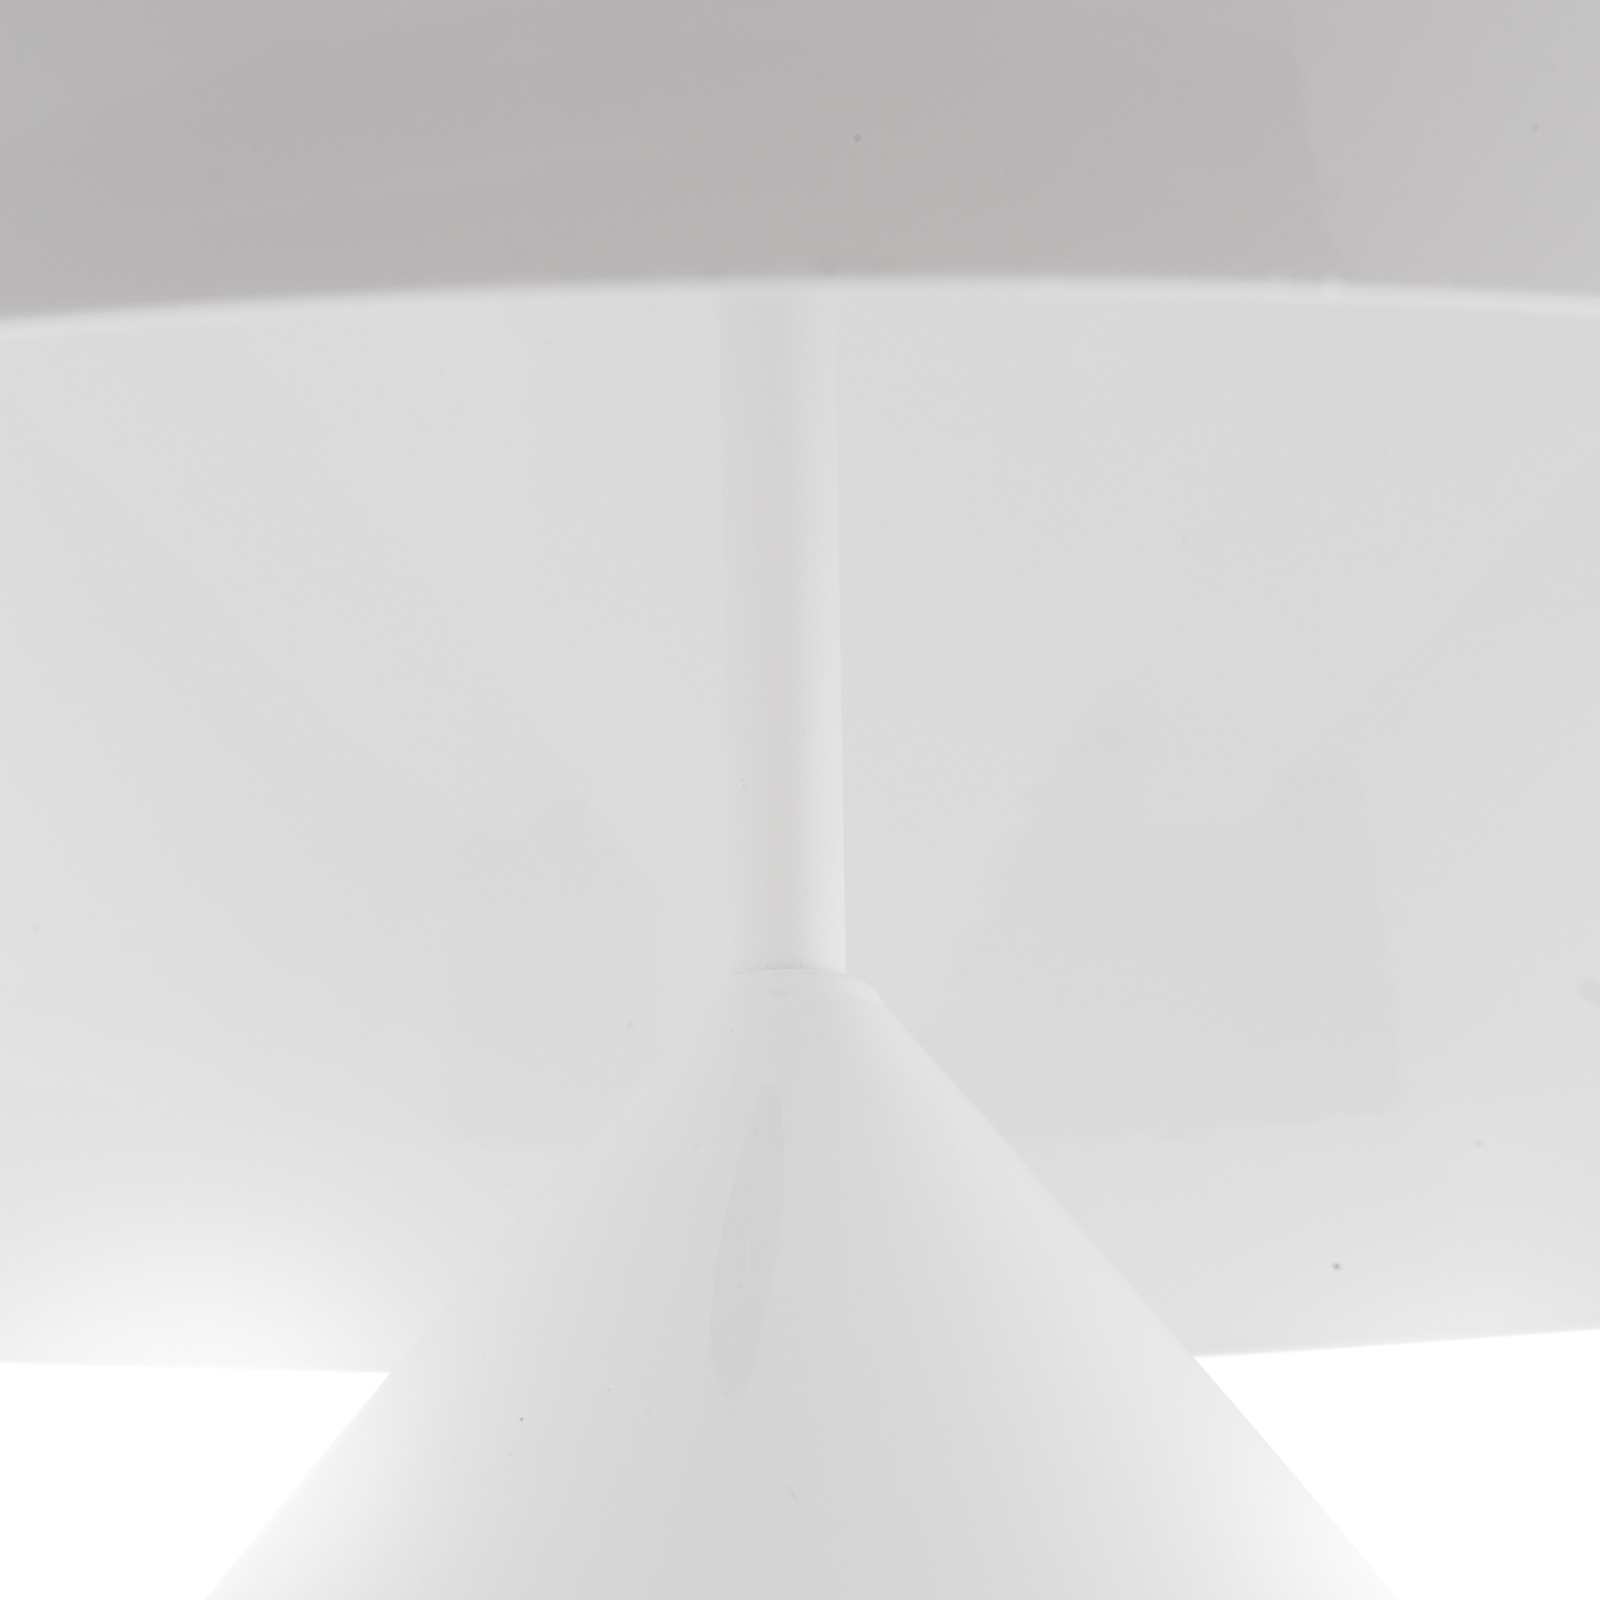 Oluce Atollo table lamp with dimmer Ø50cm white